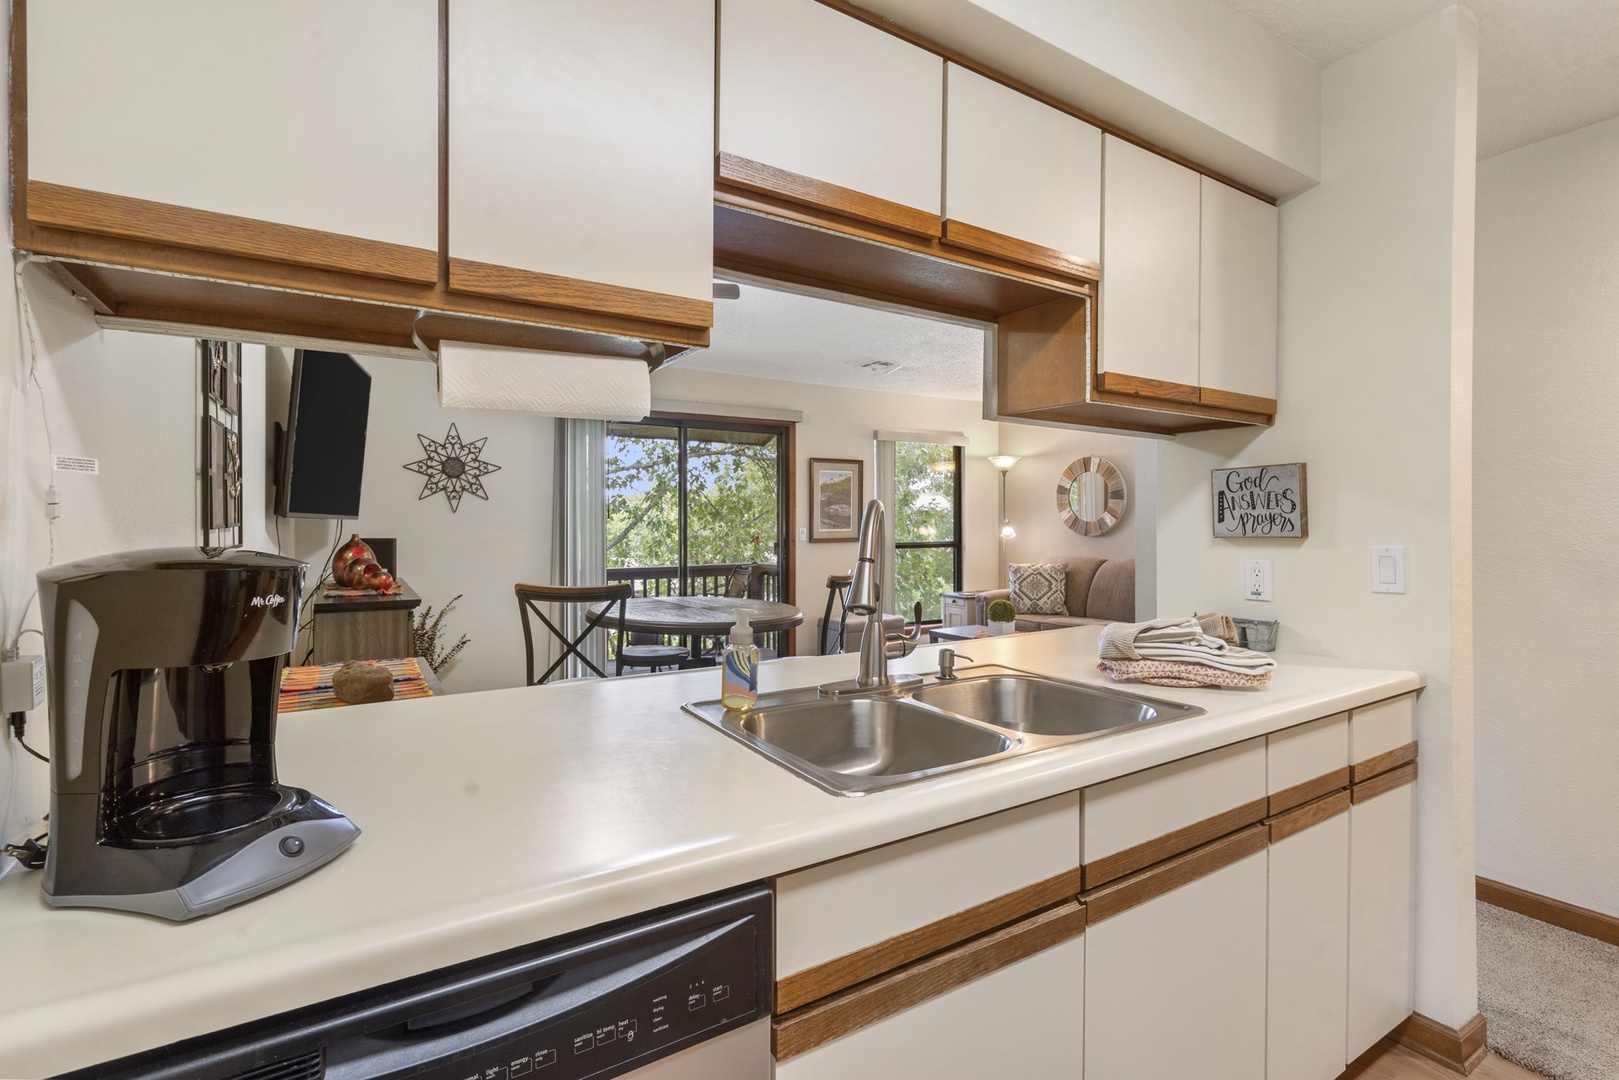 Head into the open kitchen, offering ample storage space & lots of amenities